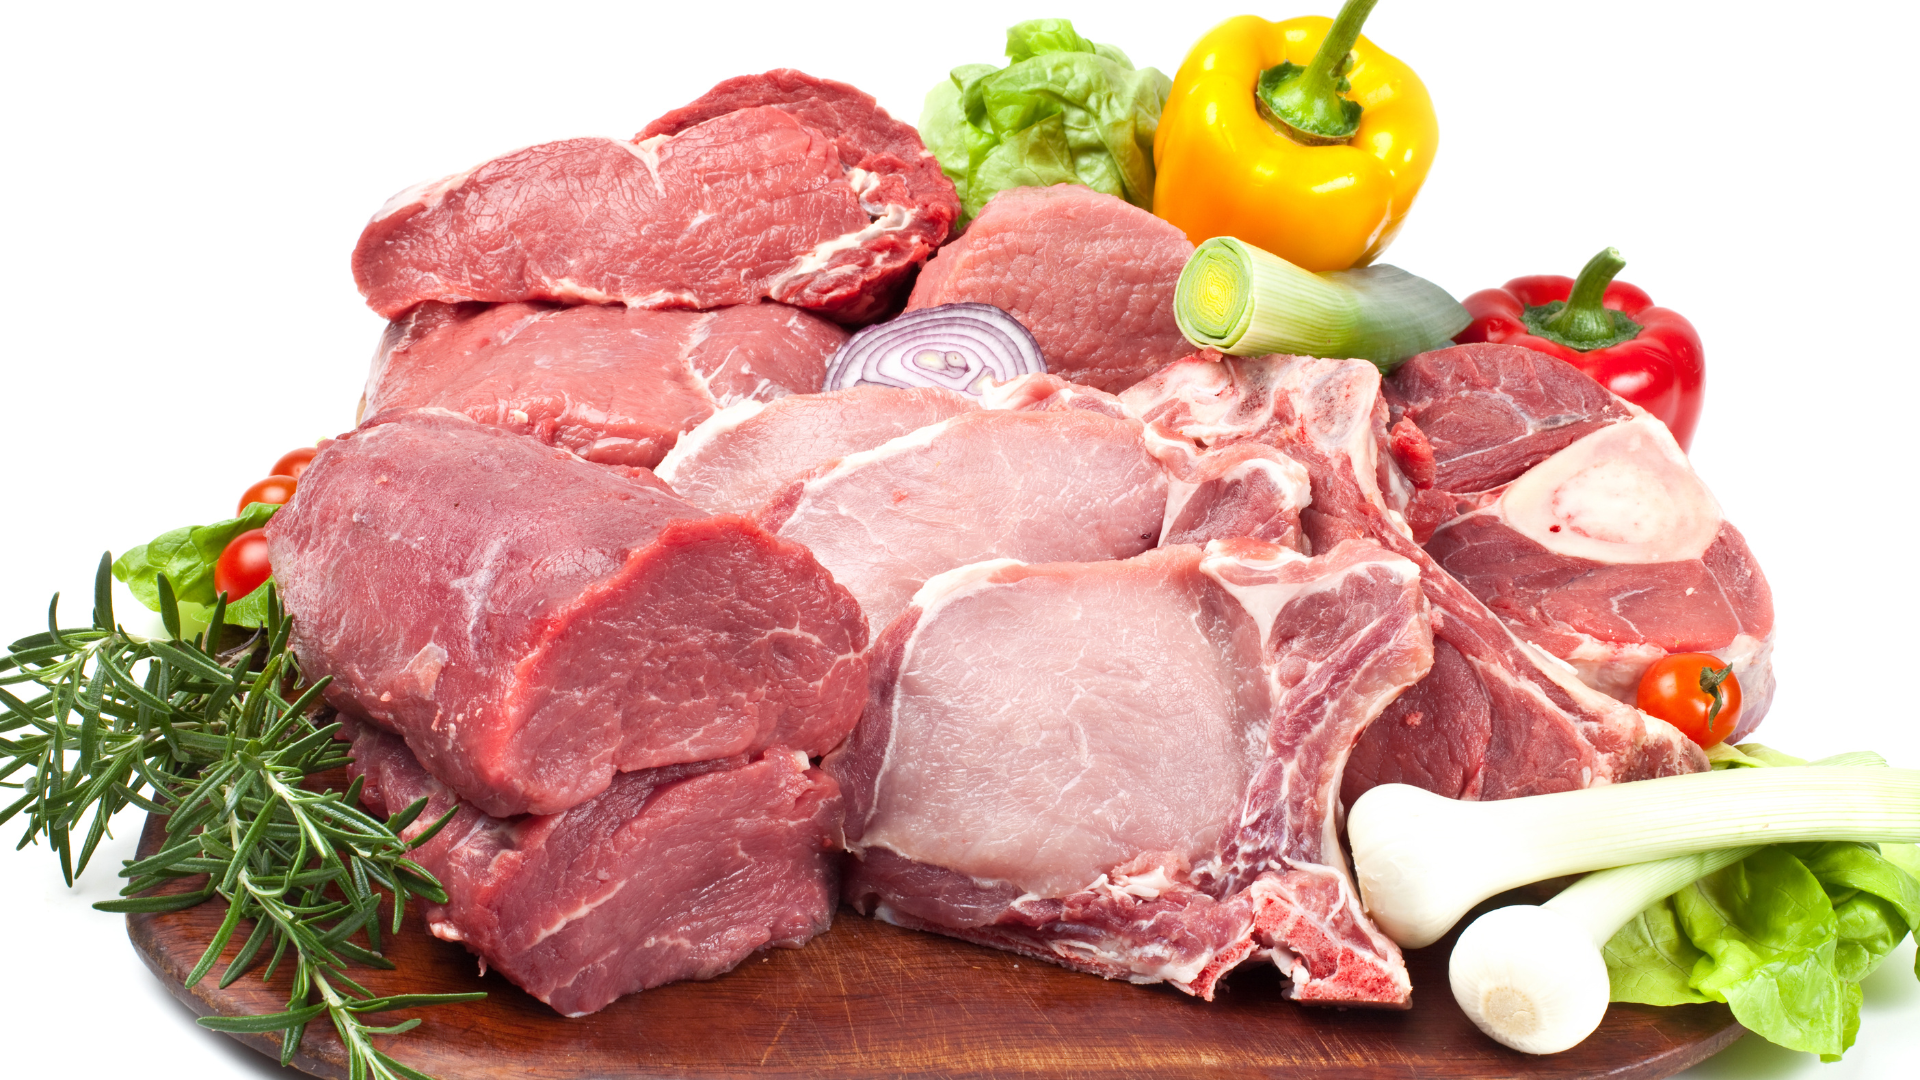 restock beef and pork to fight the food shortage in 2023